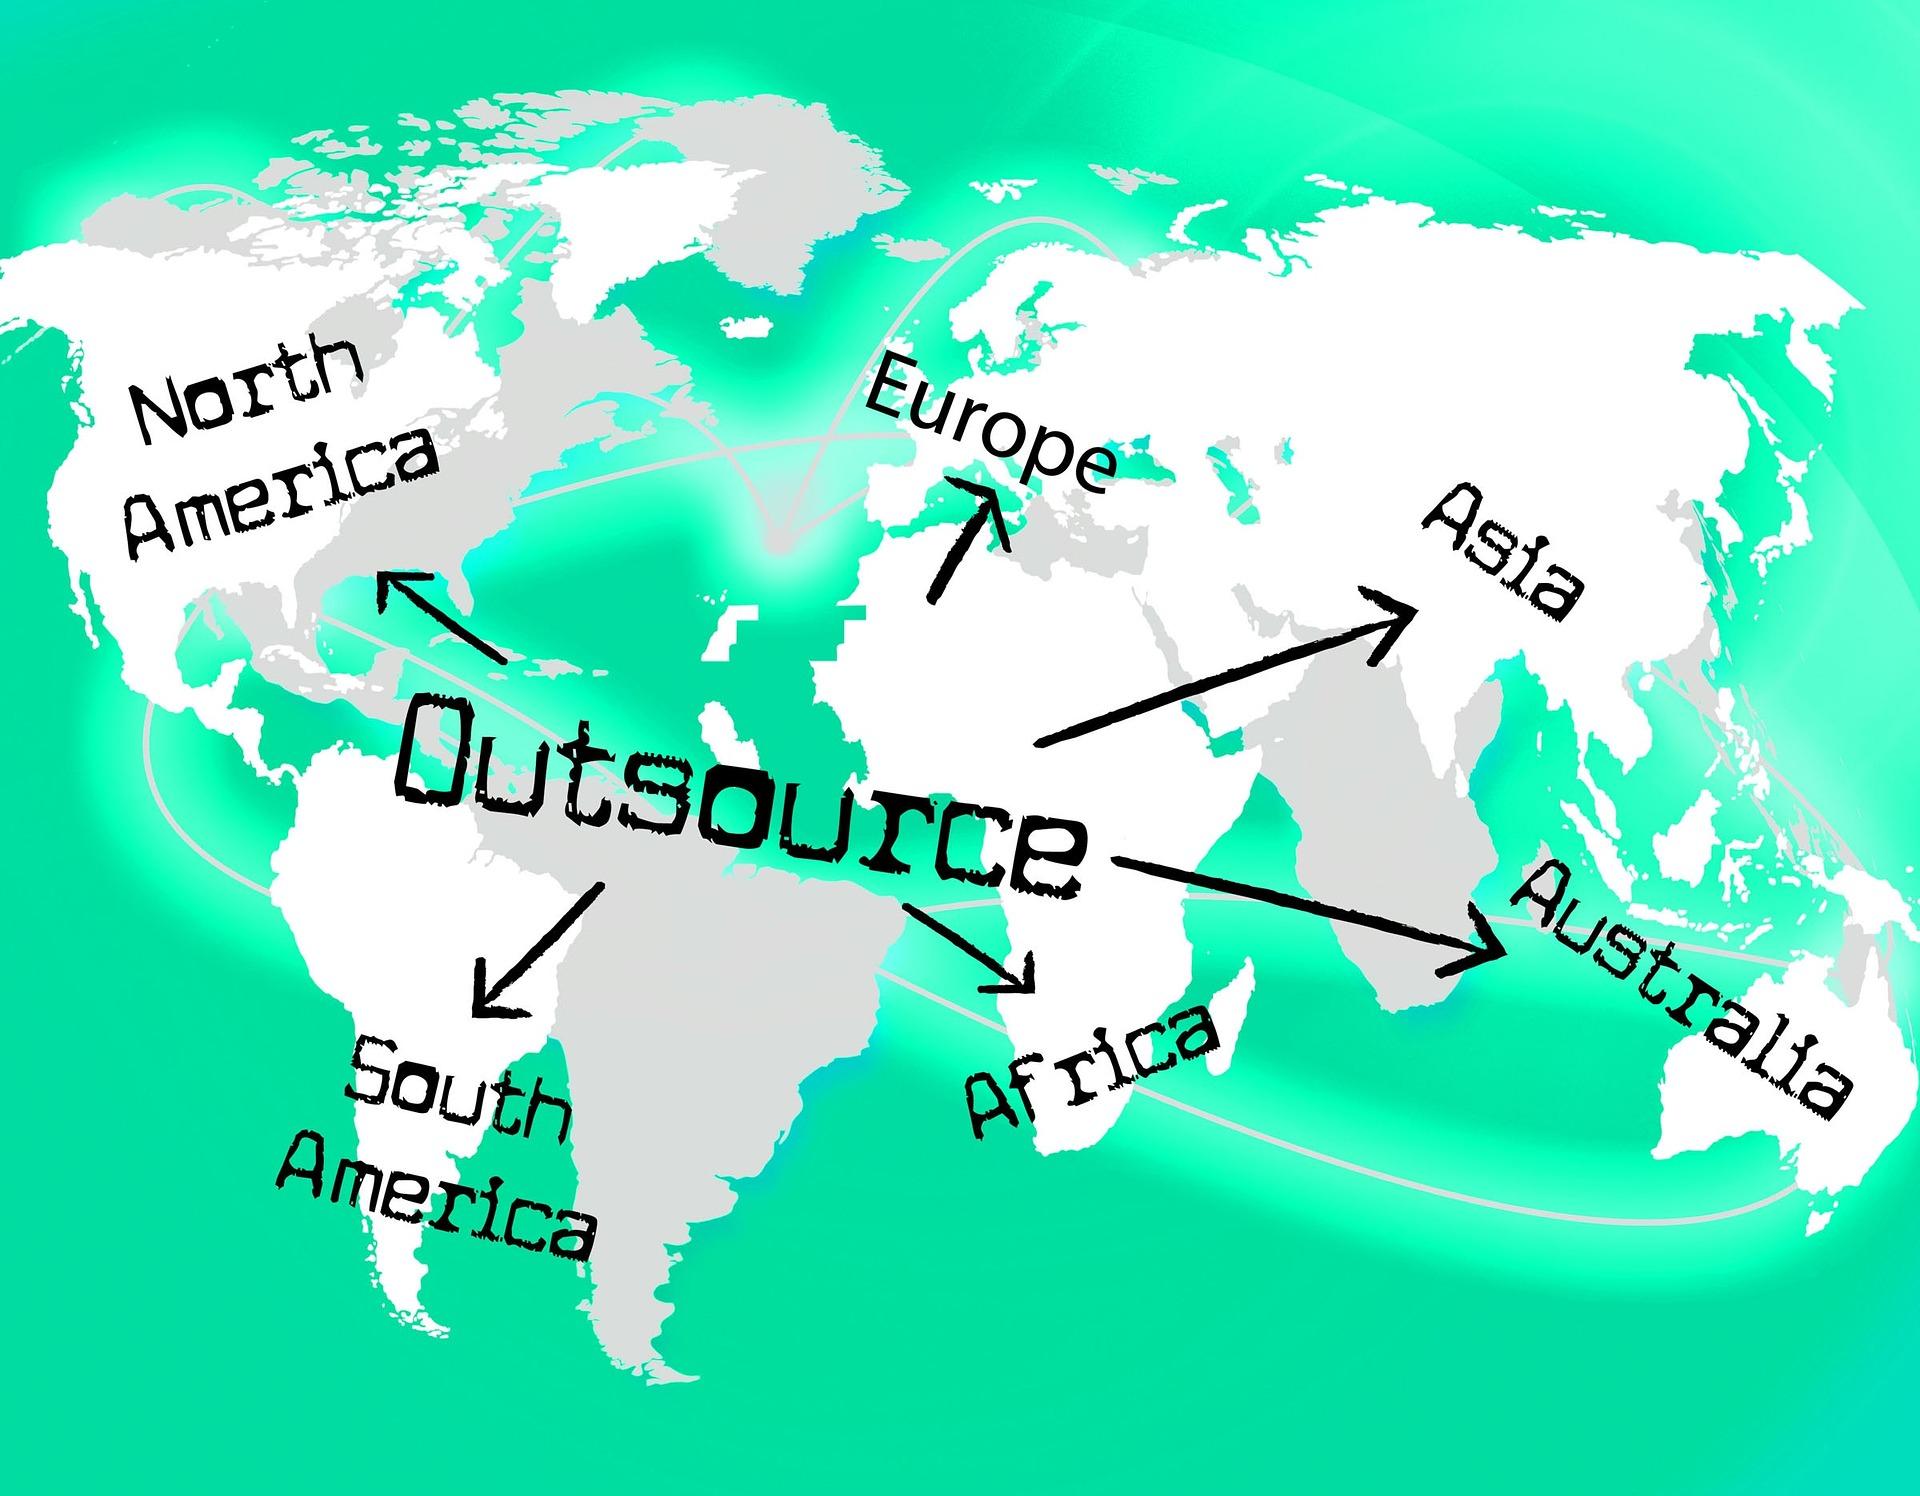 Five Reasons Why This is the Perfect Decision to Consider Outsourcing.